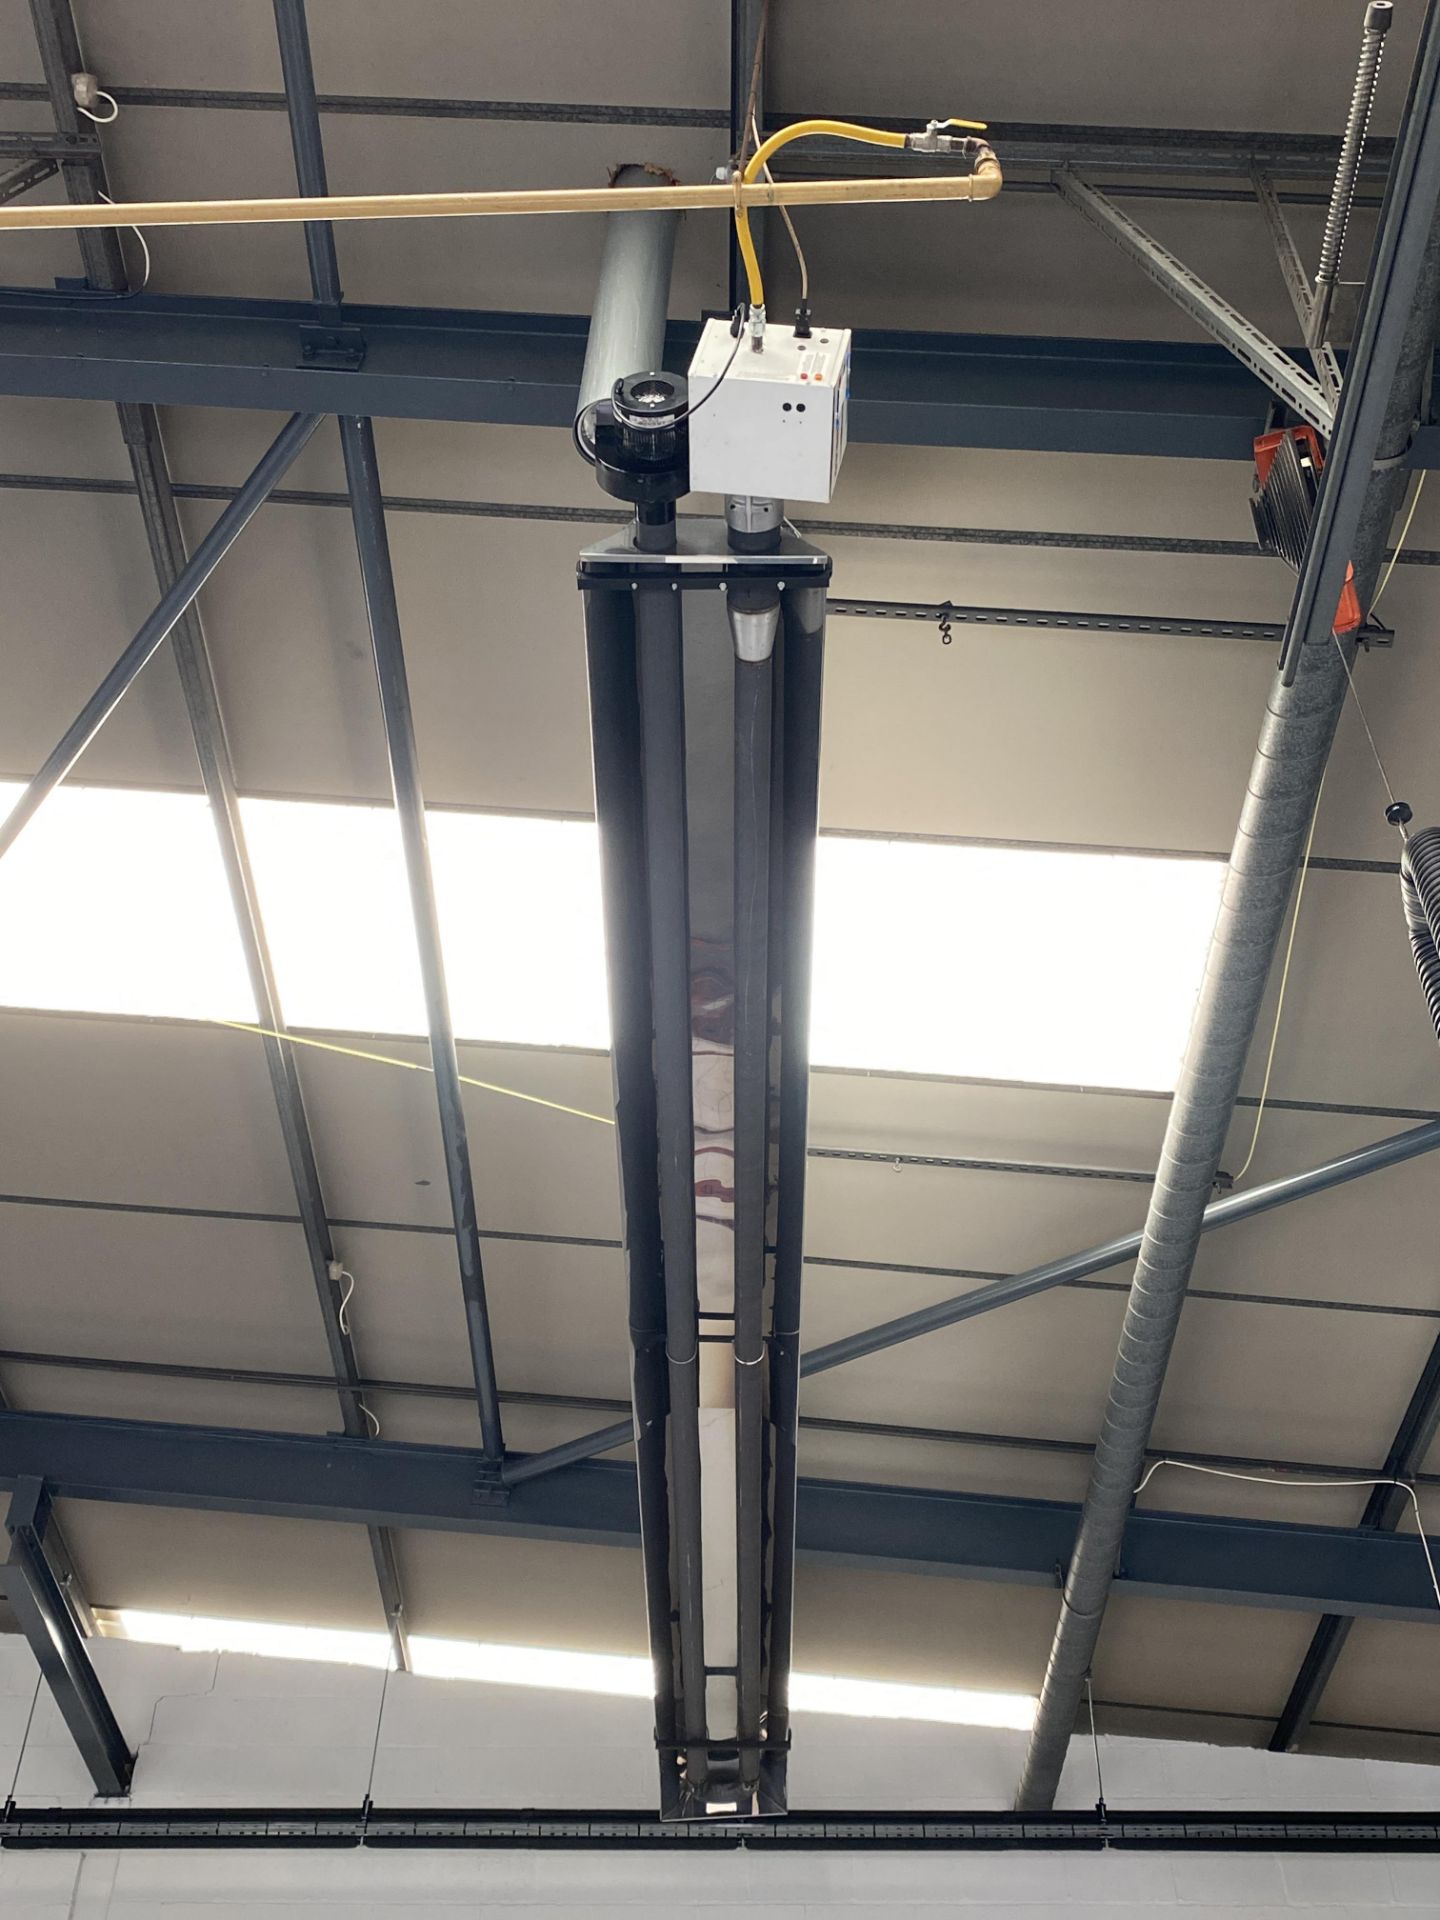 6 x AMBIRAD Vision Roof Mounted Commercial Gas Space Heaters.